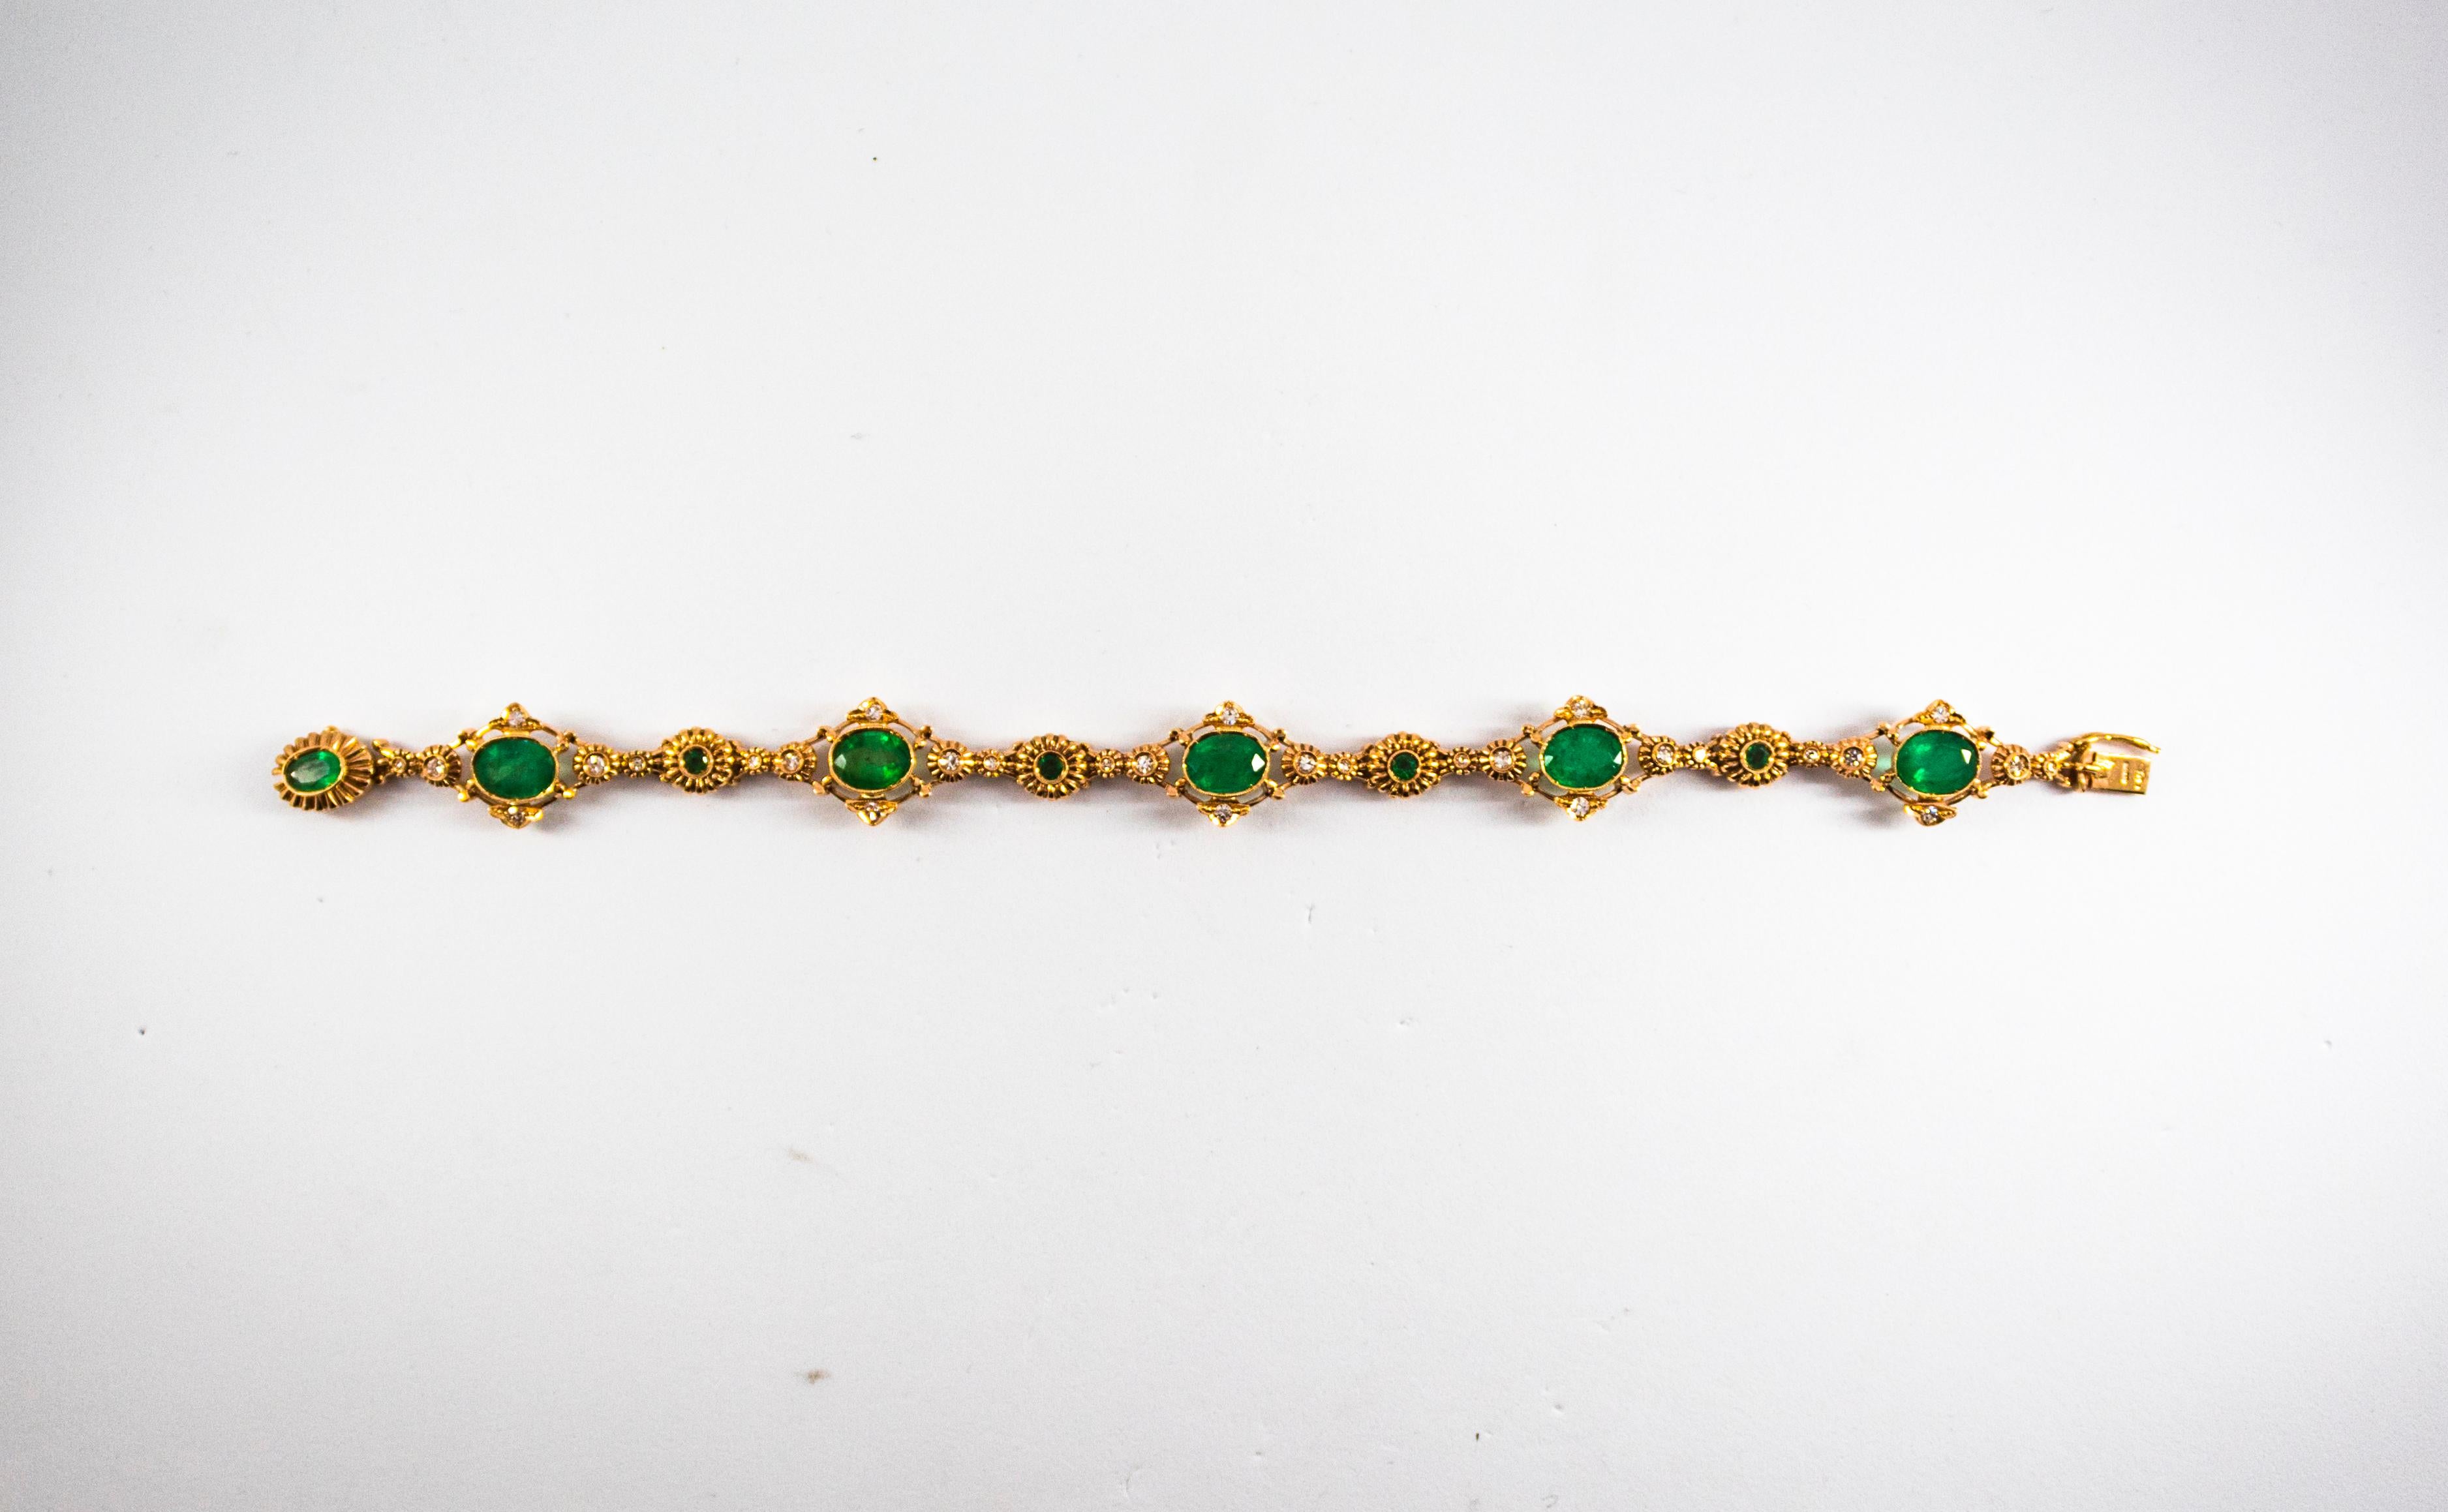 This Bracelet is made of 14K Yellow Gold.
This Bracelet has 0.45 Carats of White Diamonds.
This Bracelet has 6.40 Carats of Zambia Natural Emeralds.
This Bracelet is available also with Opals.
We're a workshop so every piece is handmade,